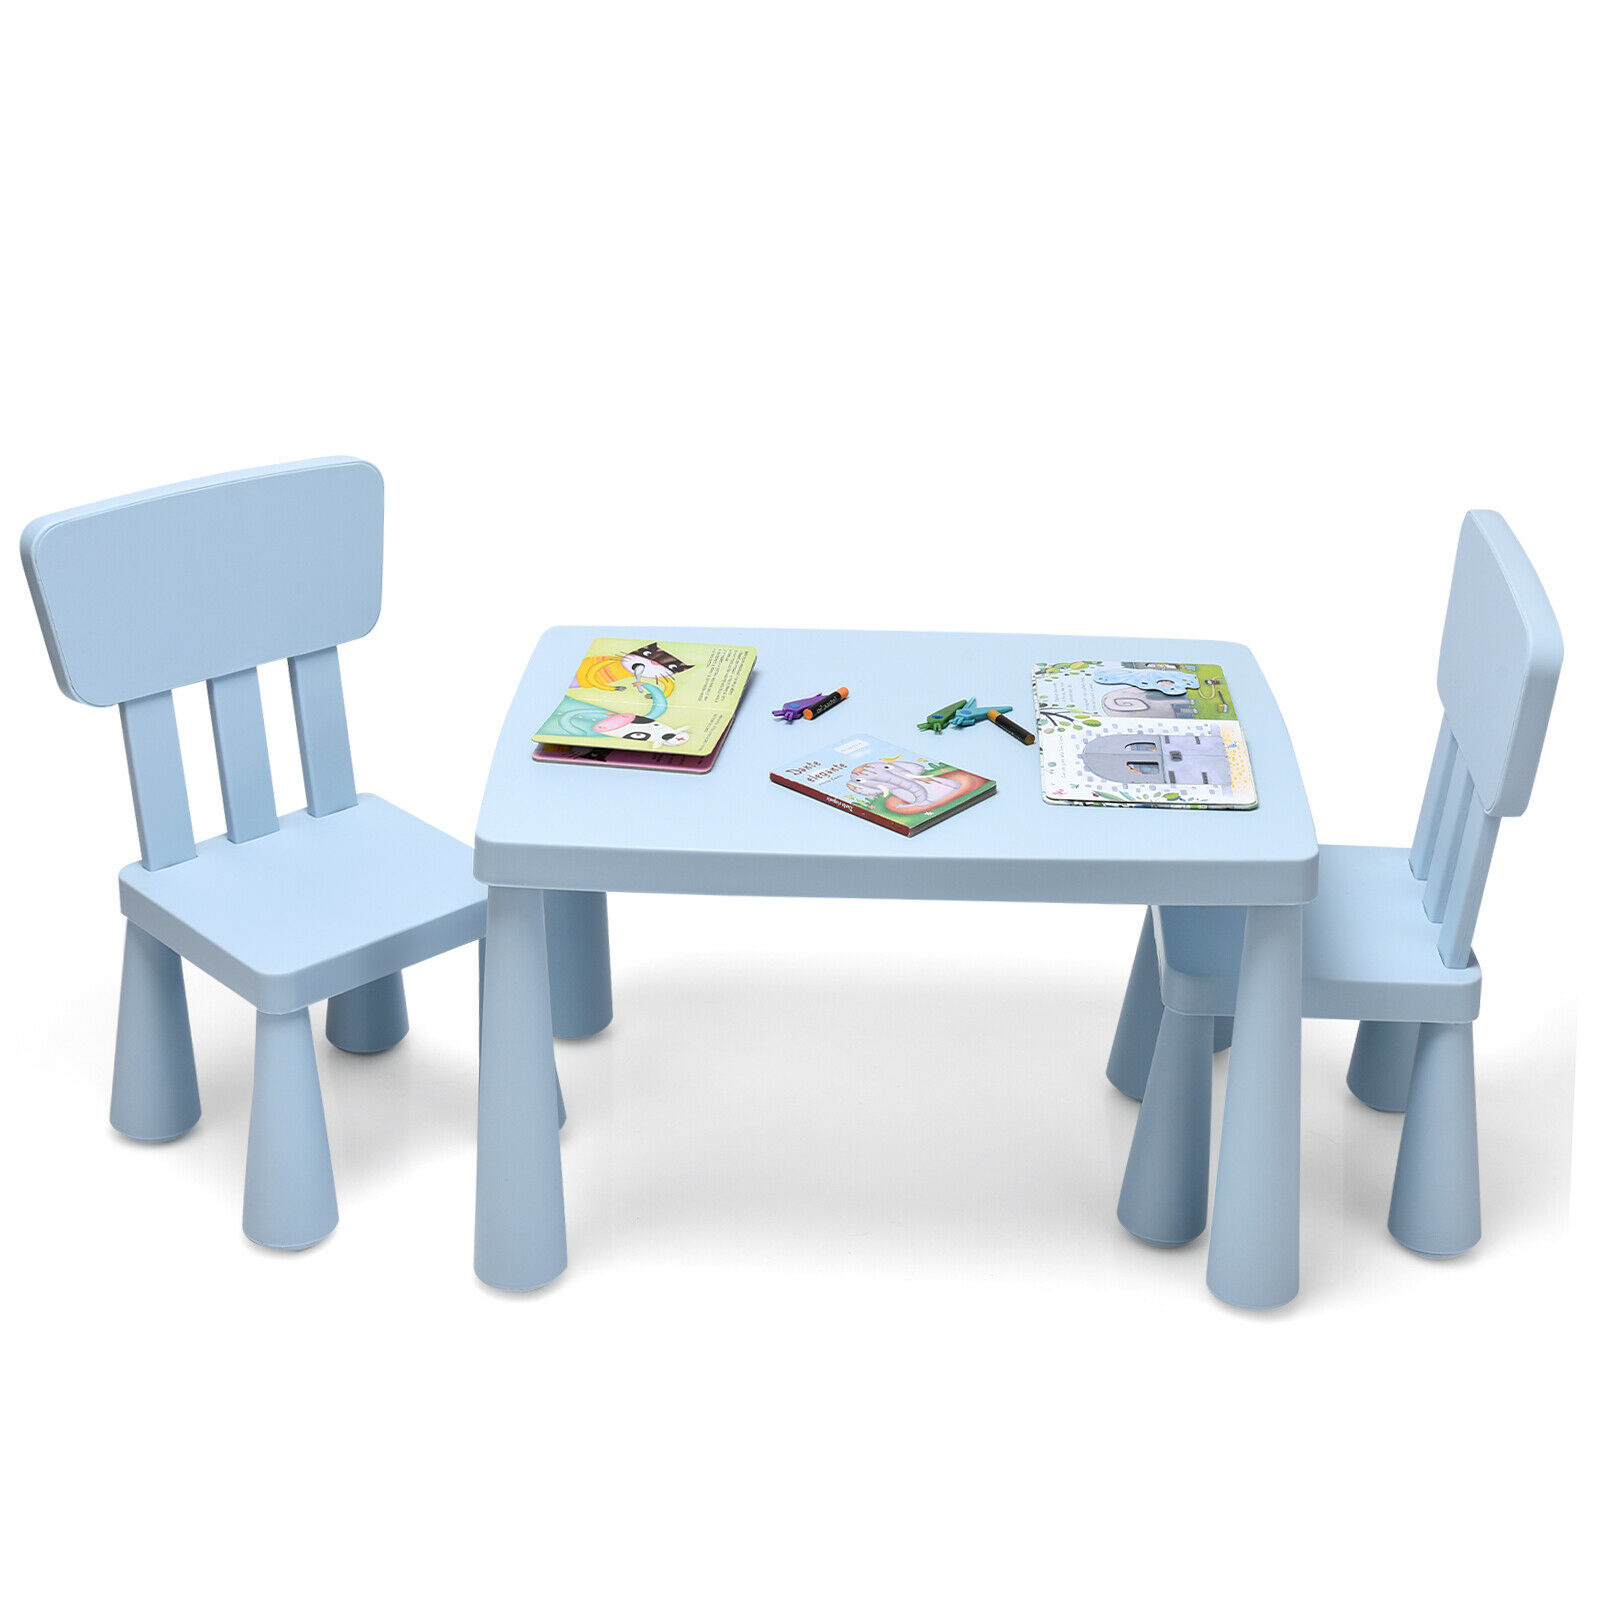 Children's Multi Activity Table and Chair Set-Blue